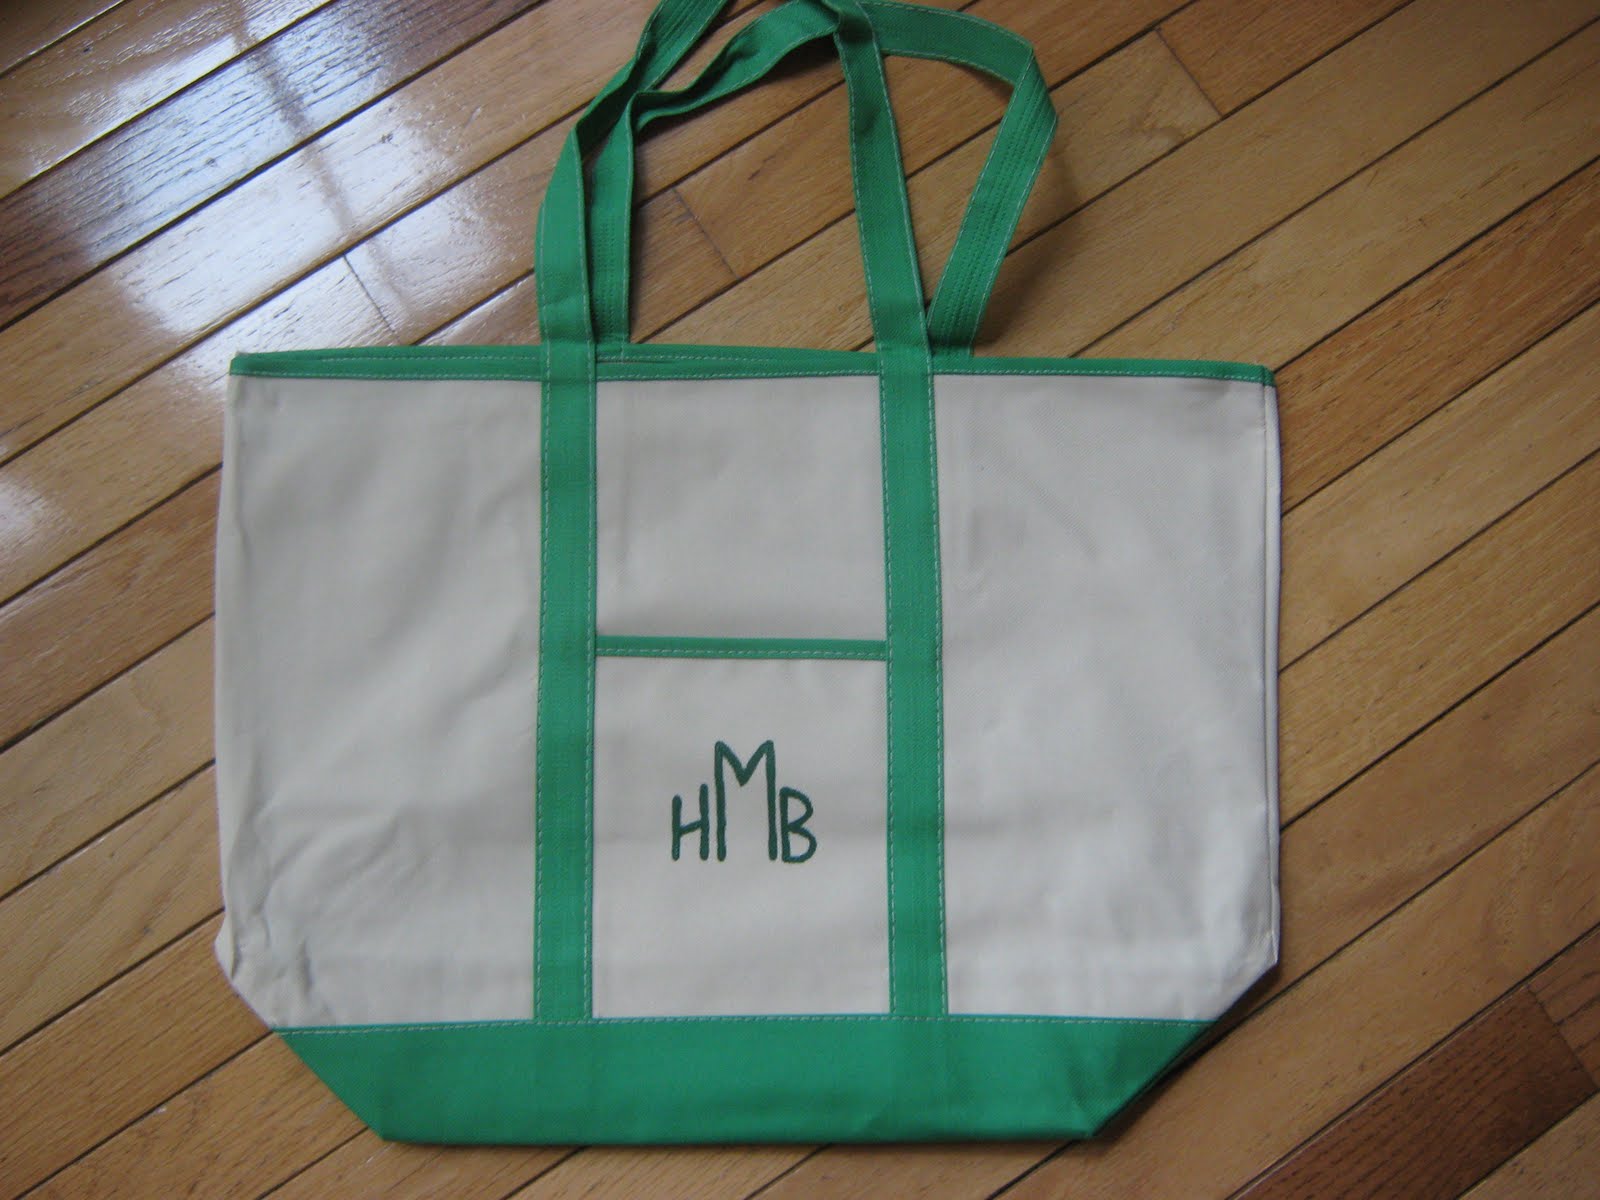 Fake-It Frugal: LL Bean Monogrammed Canvas Bags (A Little Faked)